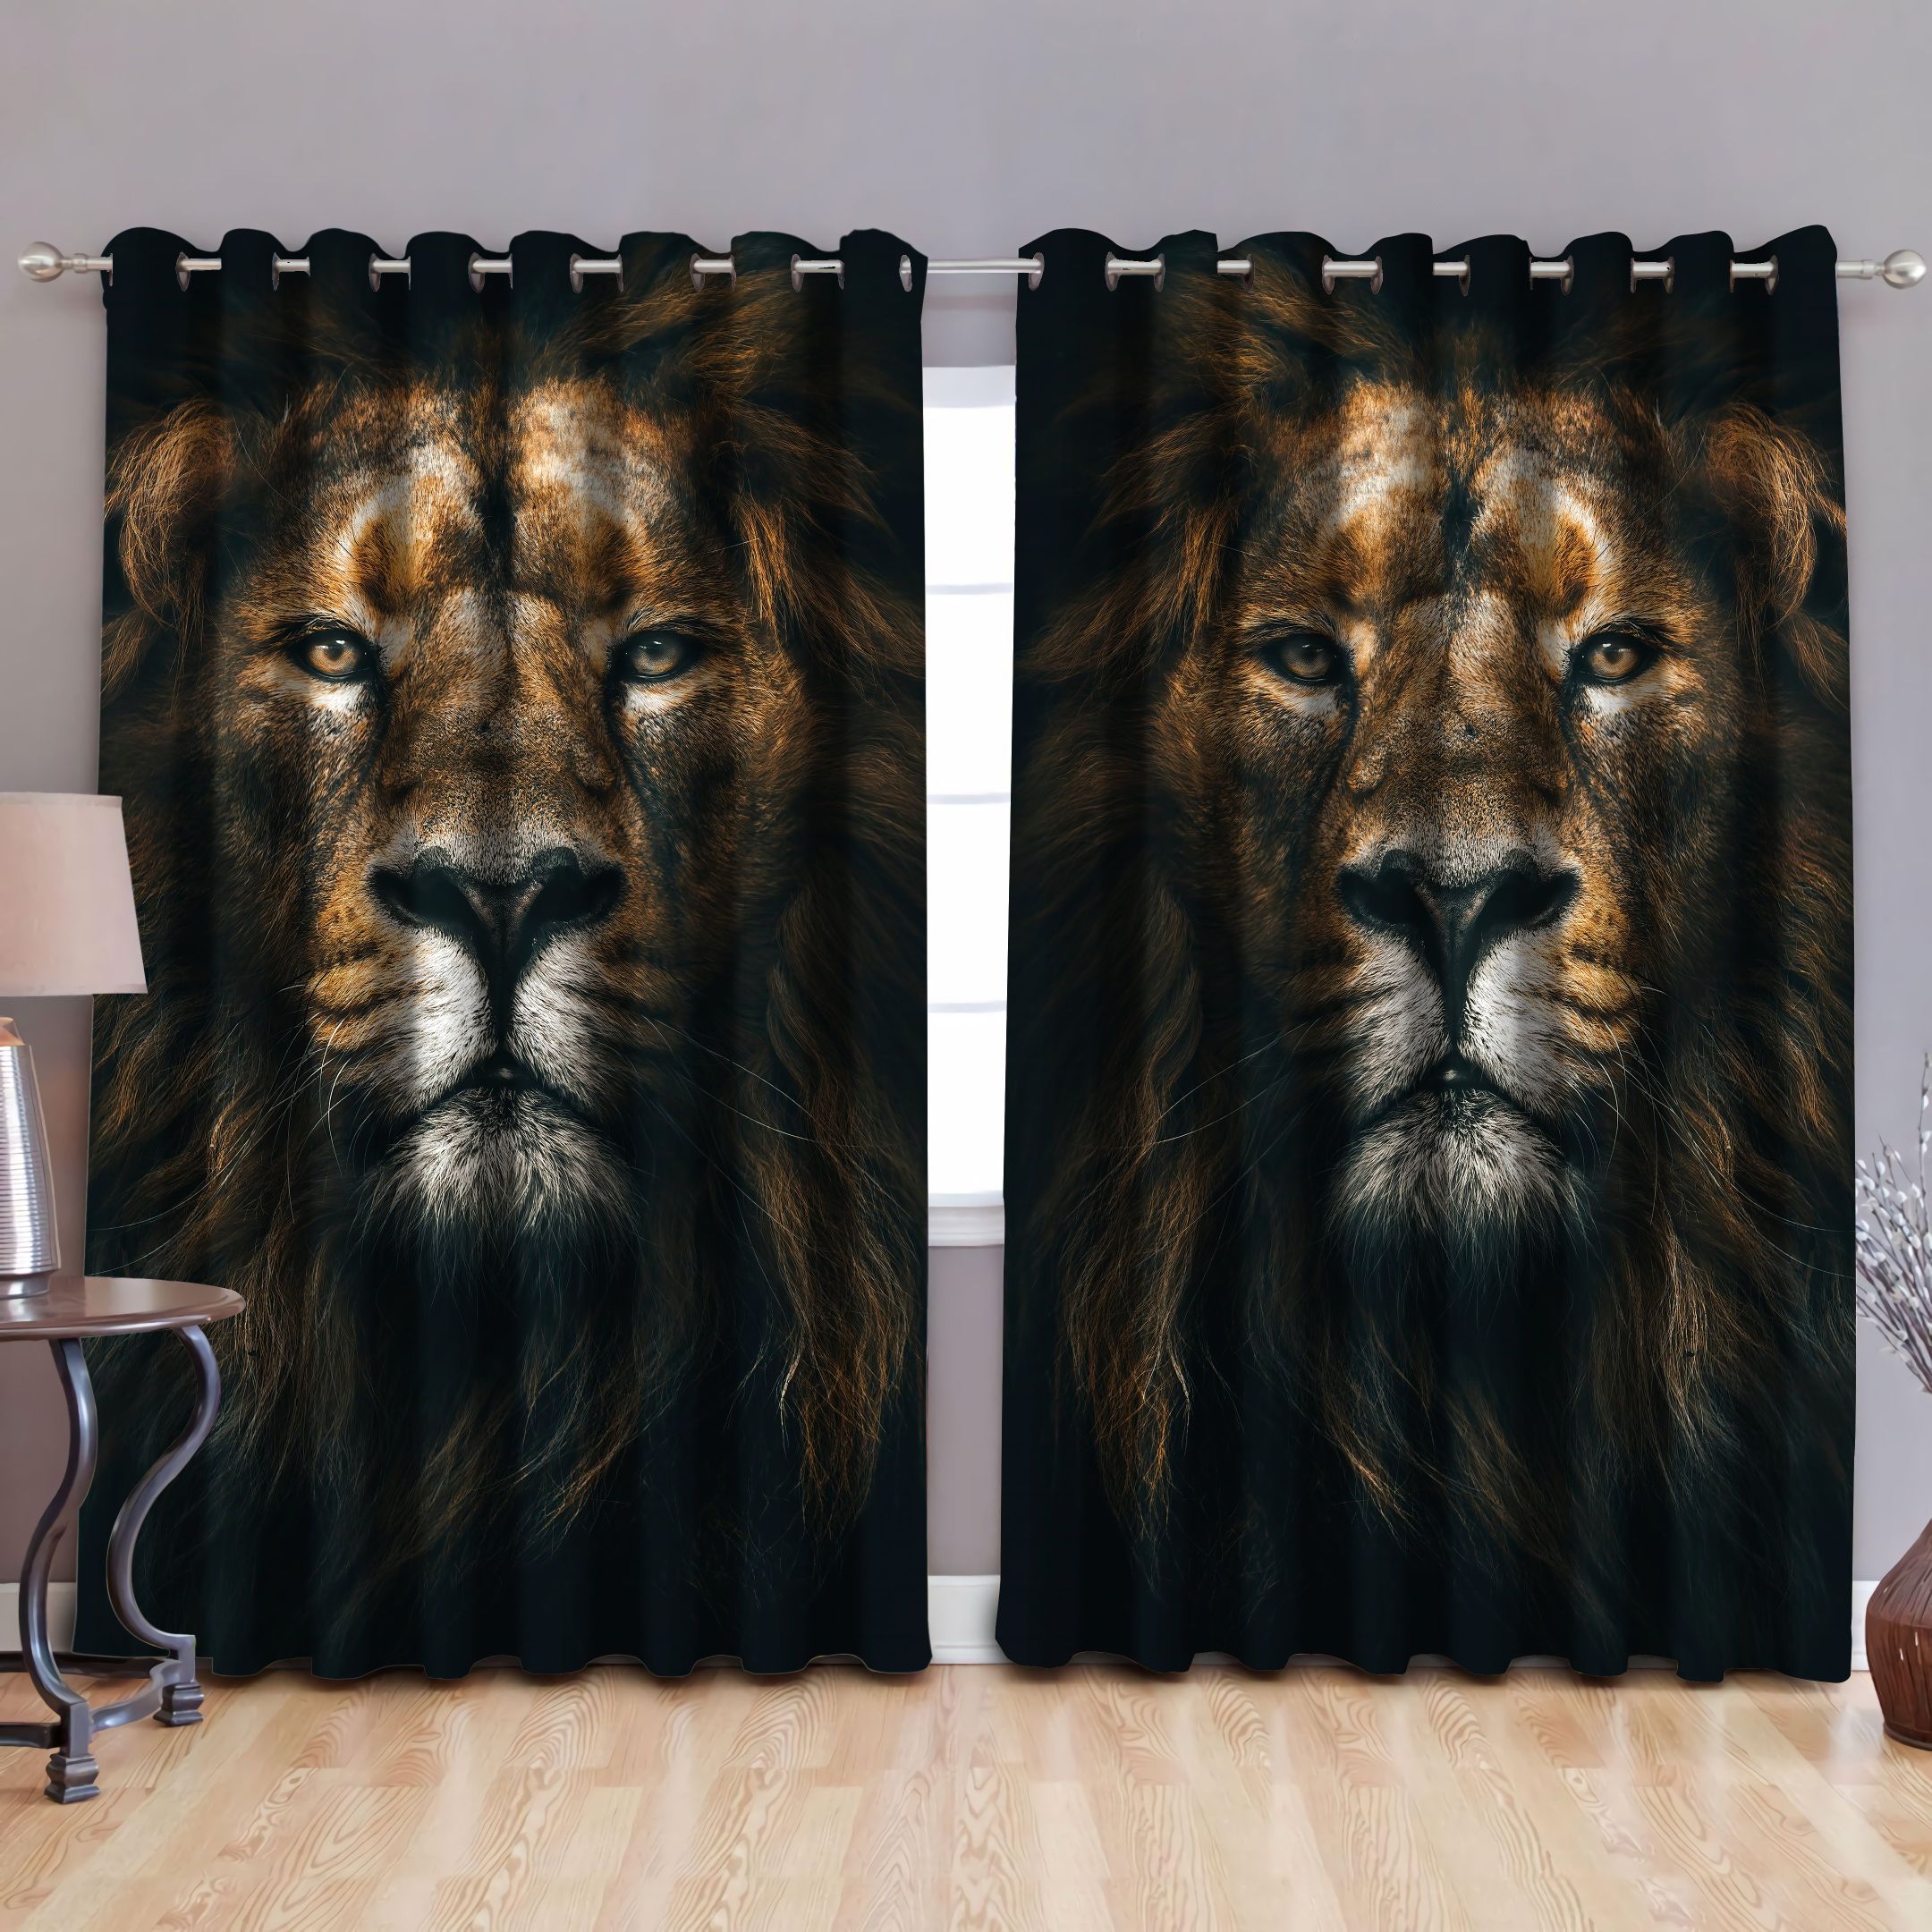 The Silence of Lion Window Curtains PAN